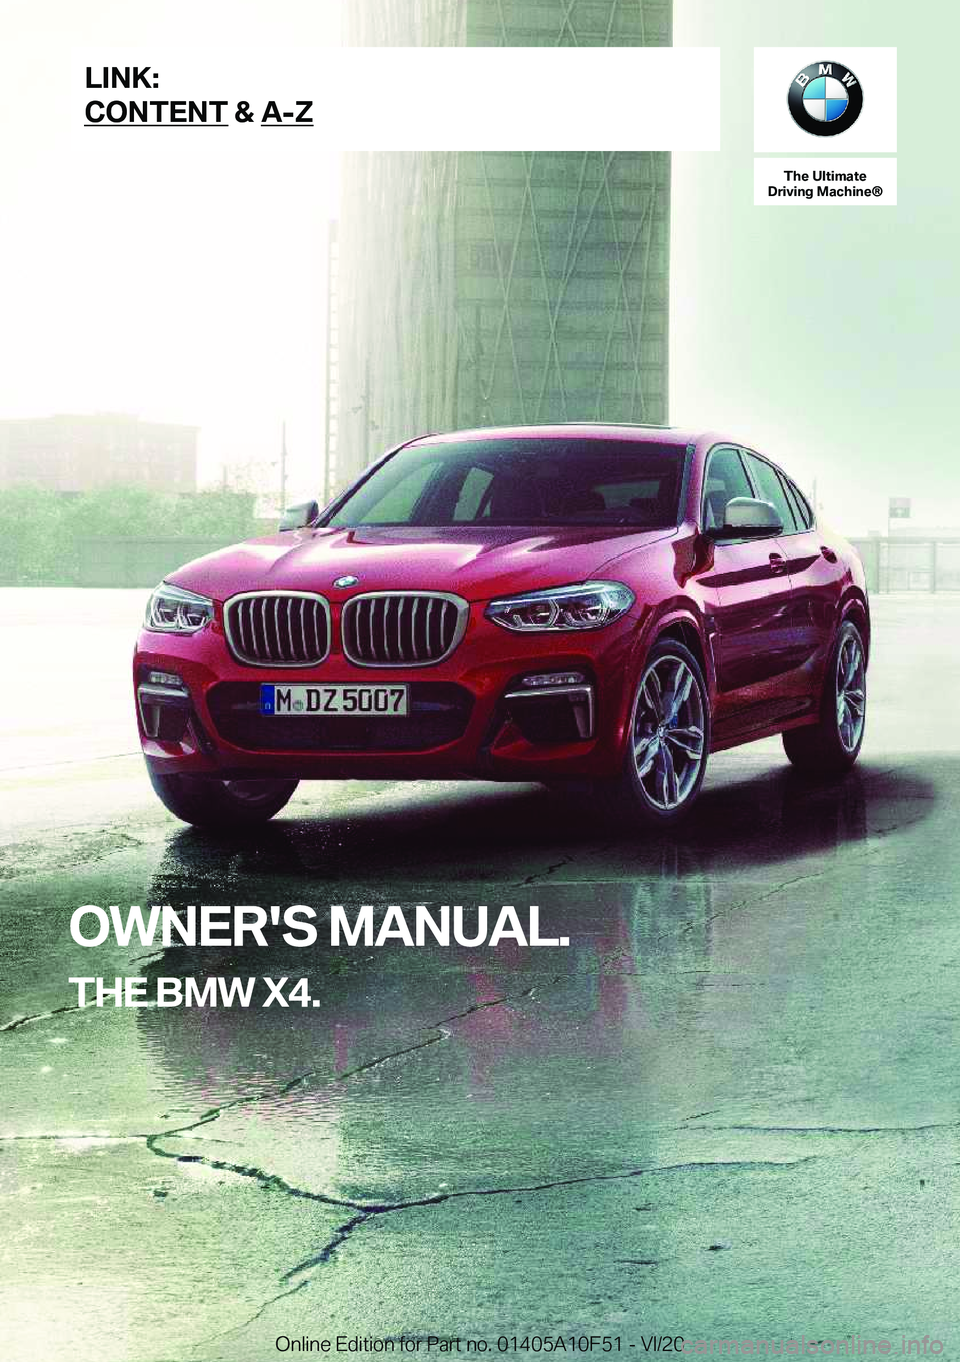 BMW X4 2021  Owners Manual �T�h�e��U�l�t�i�m�a�t�e
�D�r�i�v�i�n�g��M�a�c�h�i�n�e�n
�O�W�N�E�R�'�S��M�A�N�U�A�L�.
�T�H�E��B�M�W��X�4�.�L�I�N�K�:
�C�O�N�T�E�N�T��&��A�-�Z�O�n�l�i�n�e��E�d�i�t�i�o�n��f�o�r��P�a�r�t�